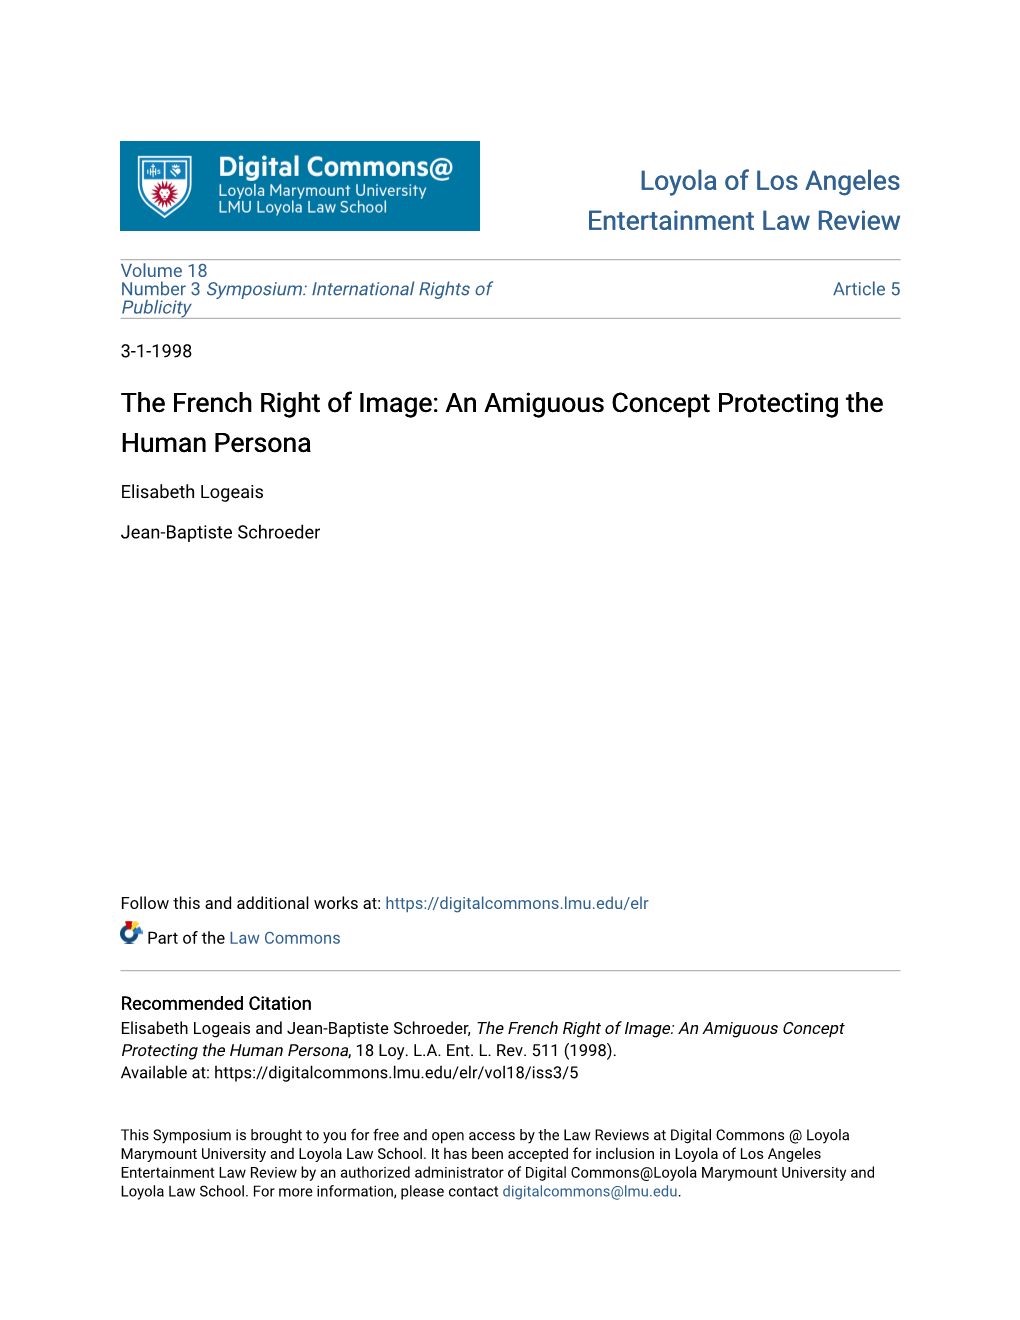 The French Right of Image: an Amiguous Concept Protecting the Human Persona